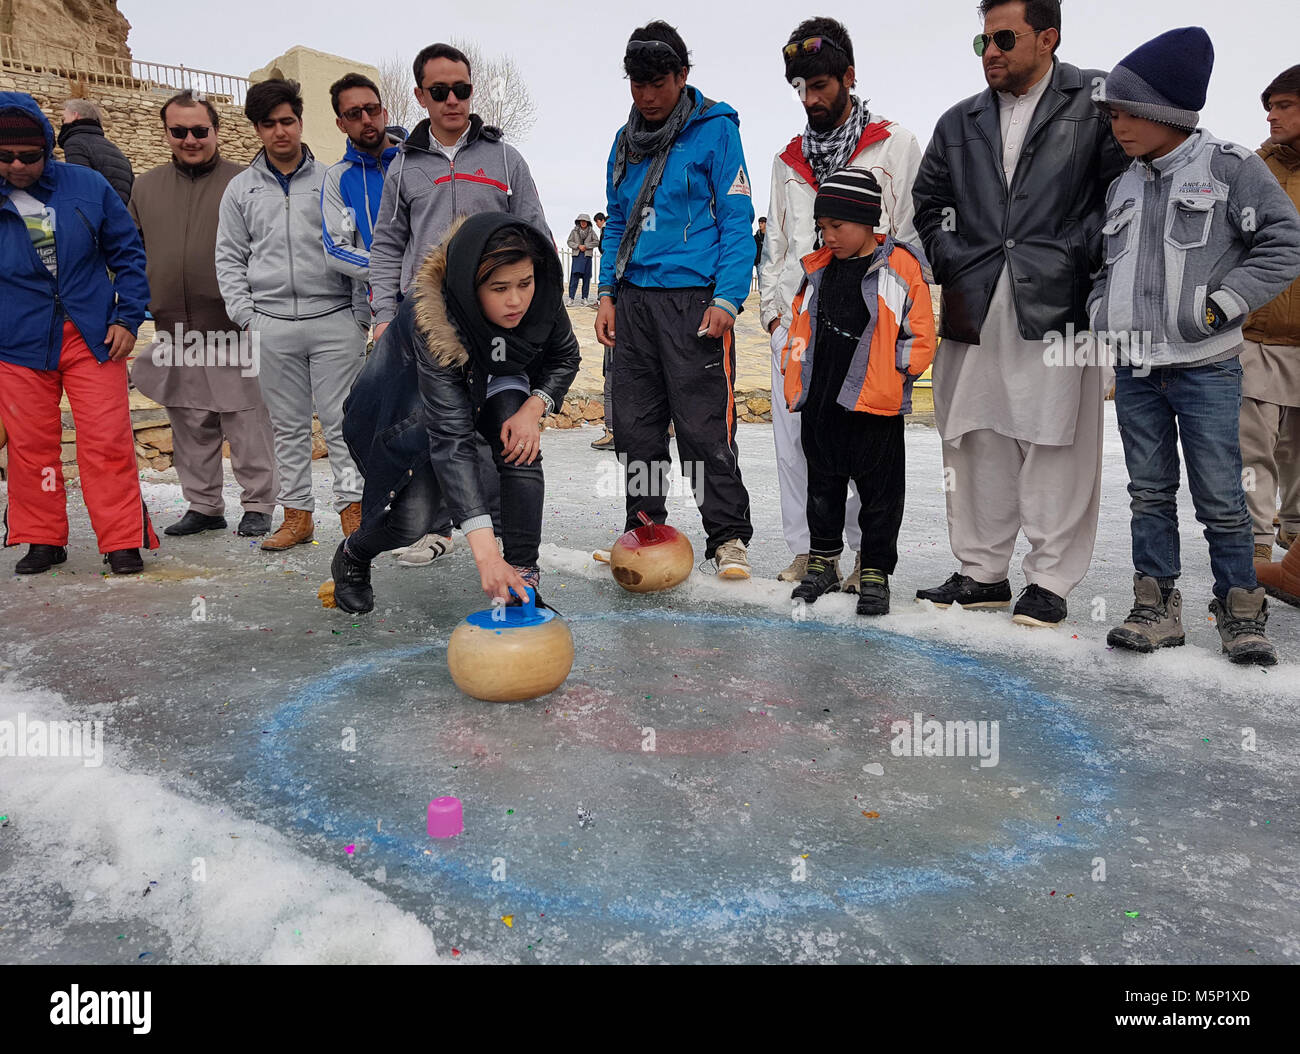 (180225) -- BAMYAN, Feb. 25 (Xinhua) -- A woman plays curling during a winter game festival in Bamyan province, Afghanistan, Feb. 23. 2018. Stock Photo